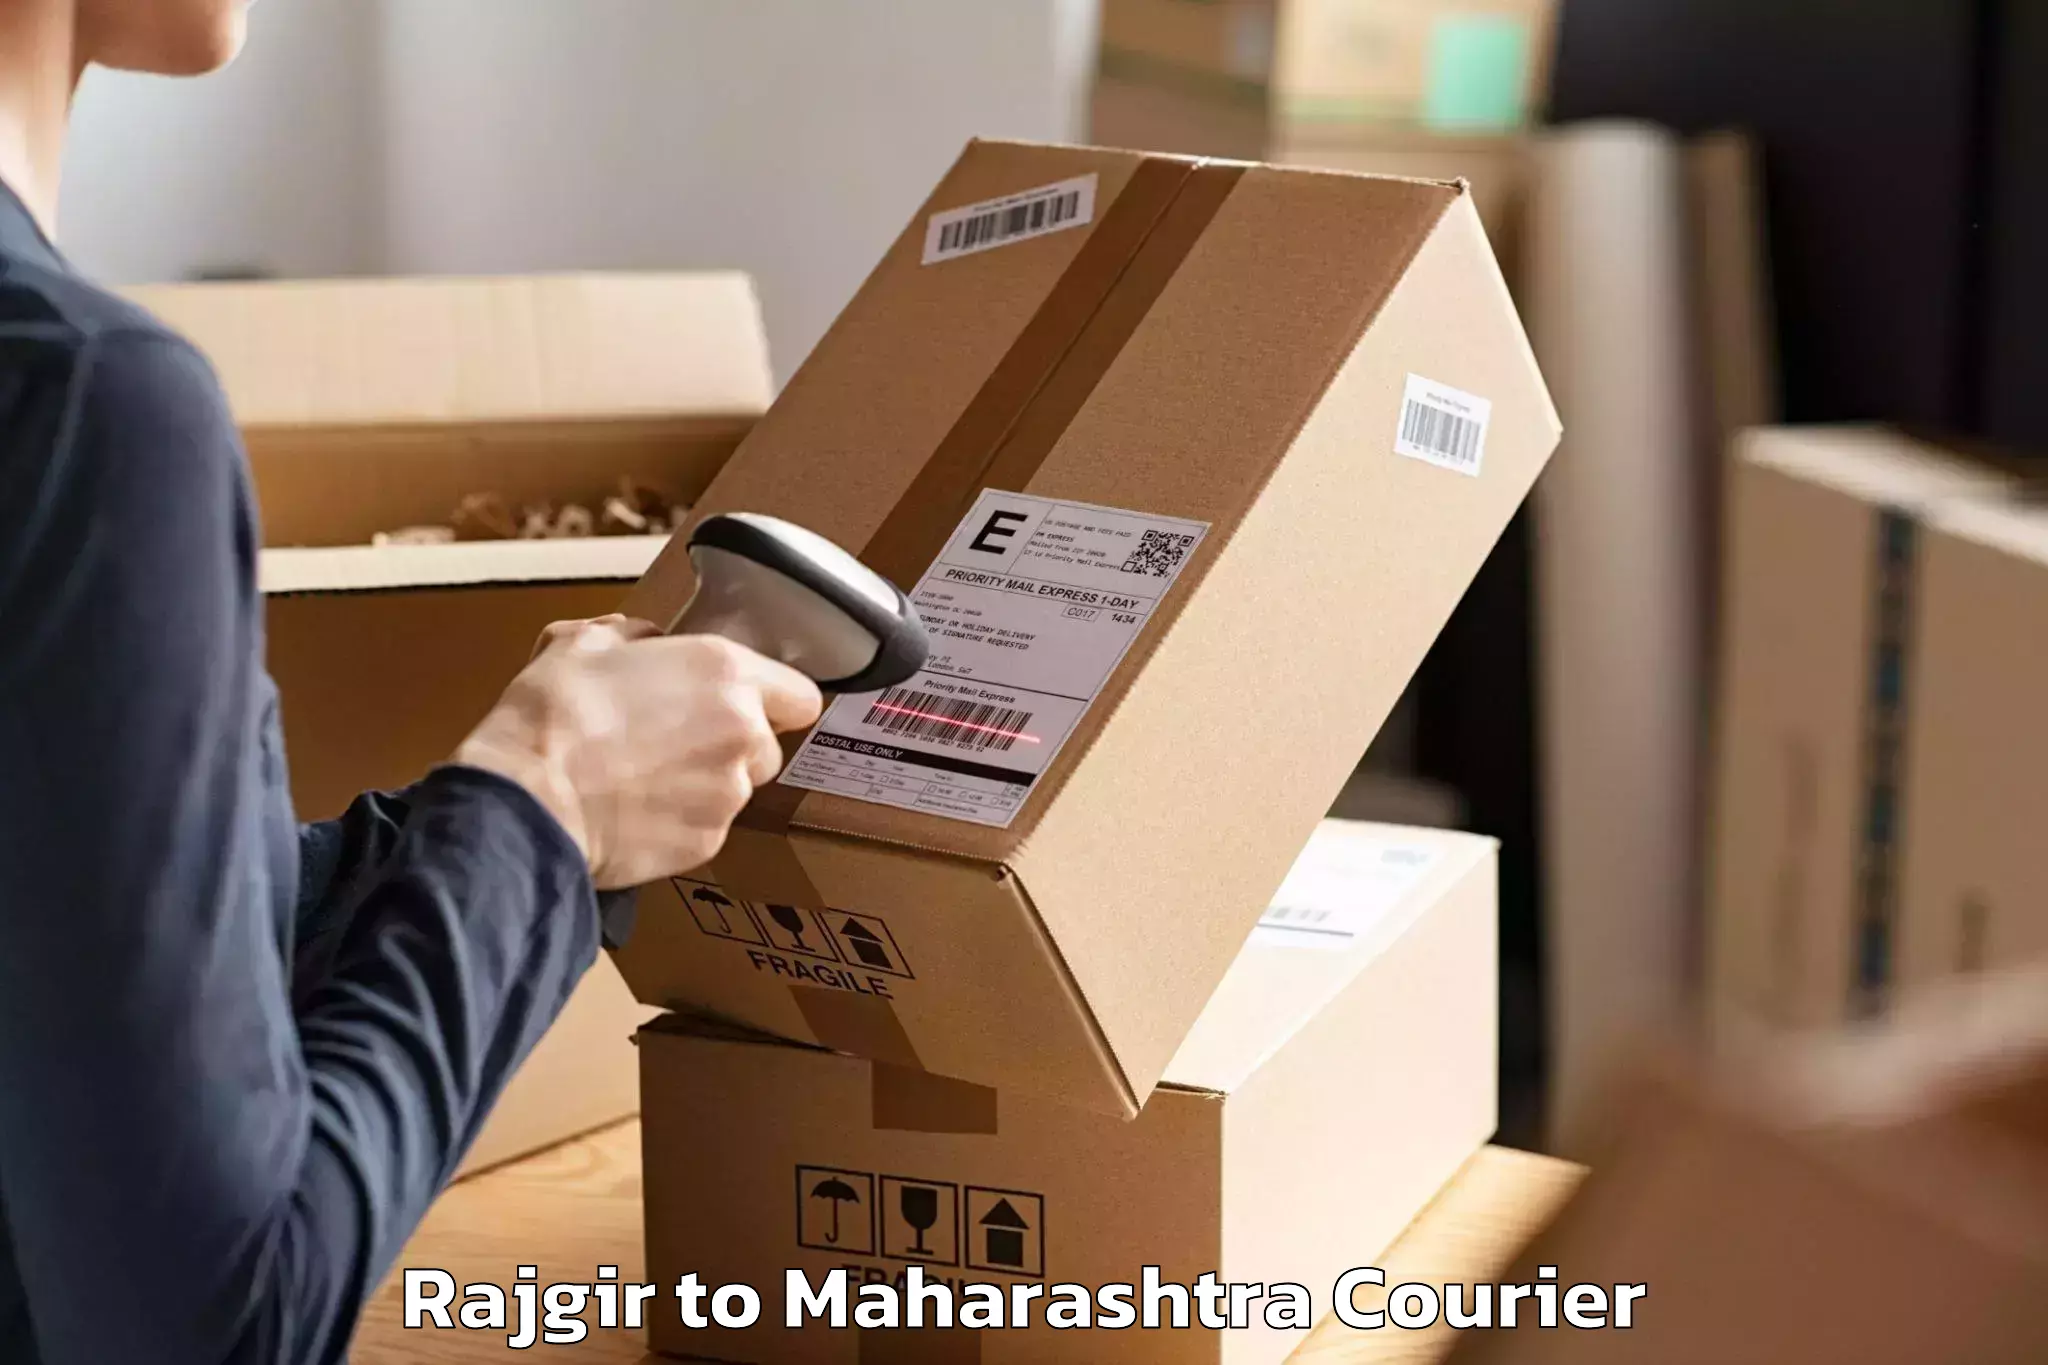 Professional movers in Rajgir to Maharashtra